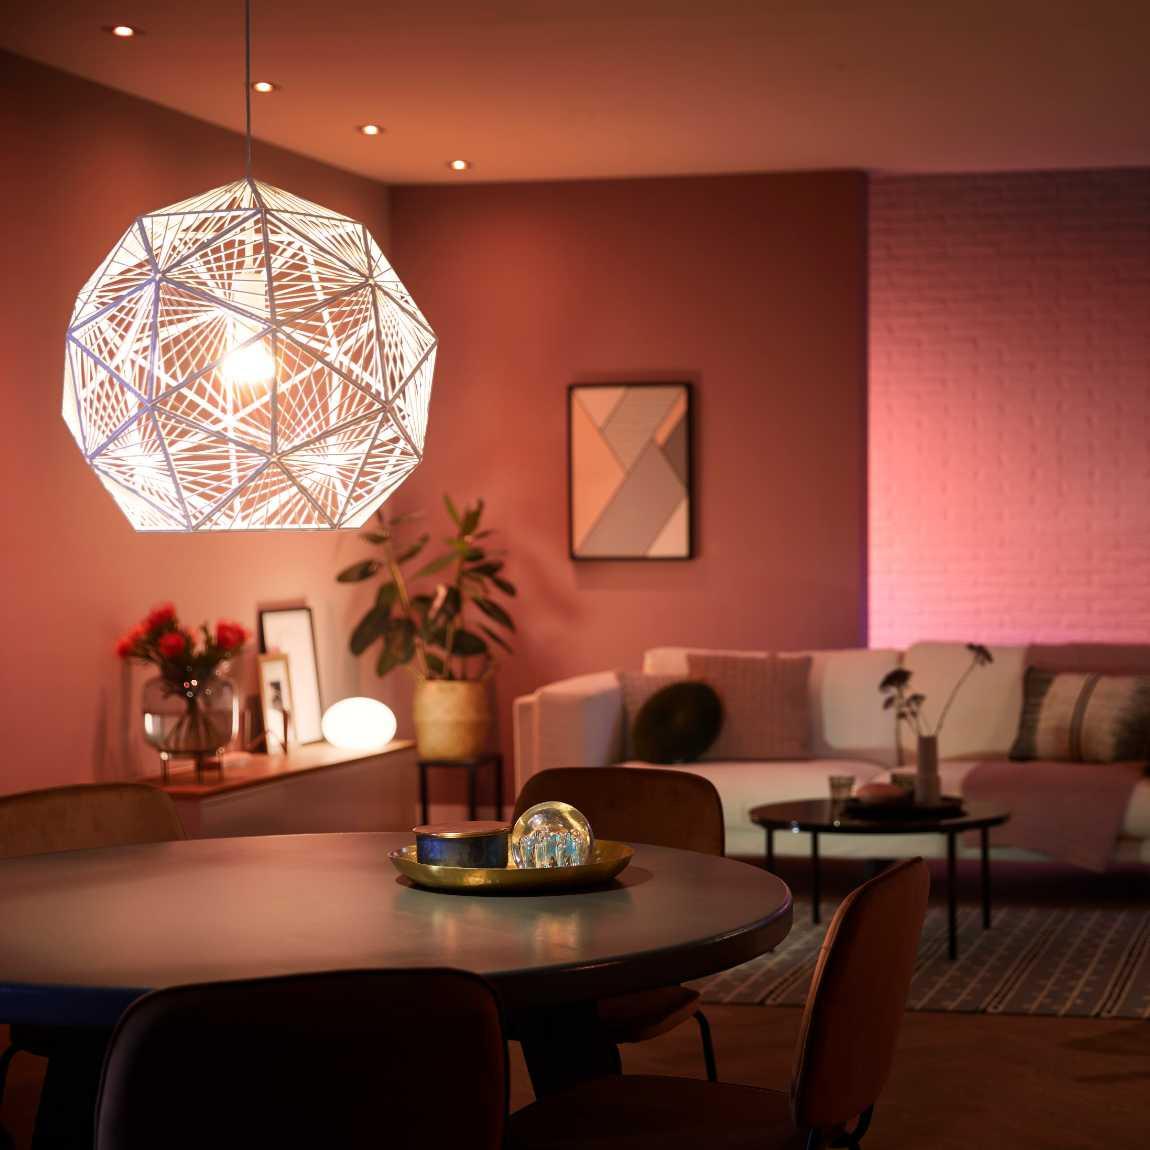 Philips Hue White & Color Ambiance E27 800lm 3er Starter-Set_Lifestyle_farbiges Wohnzimmer